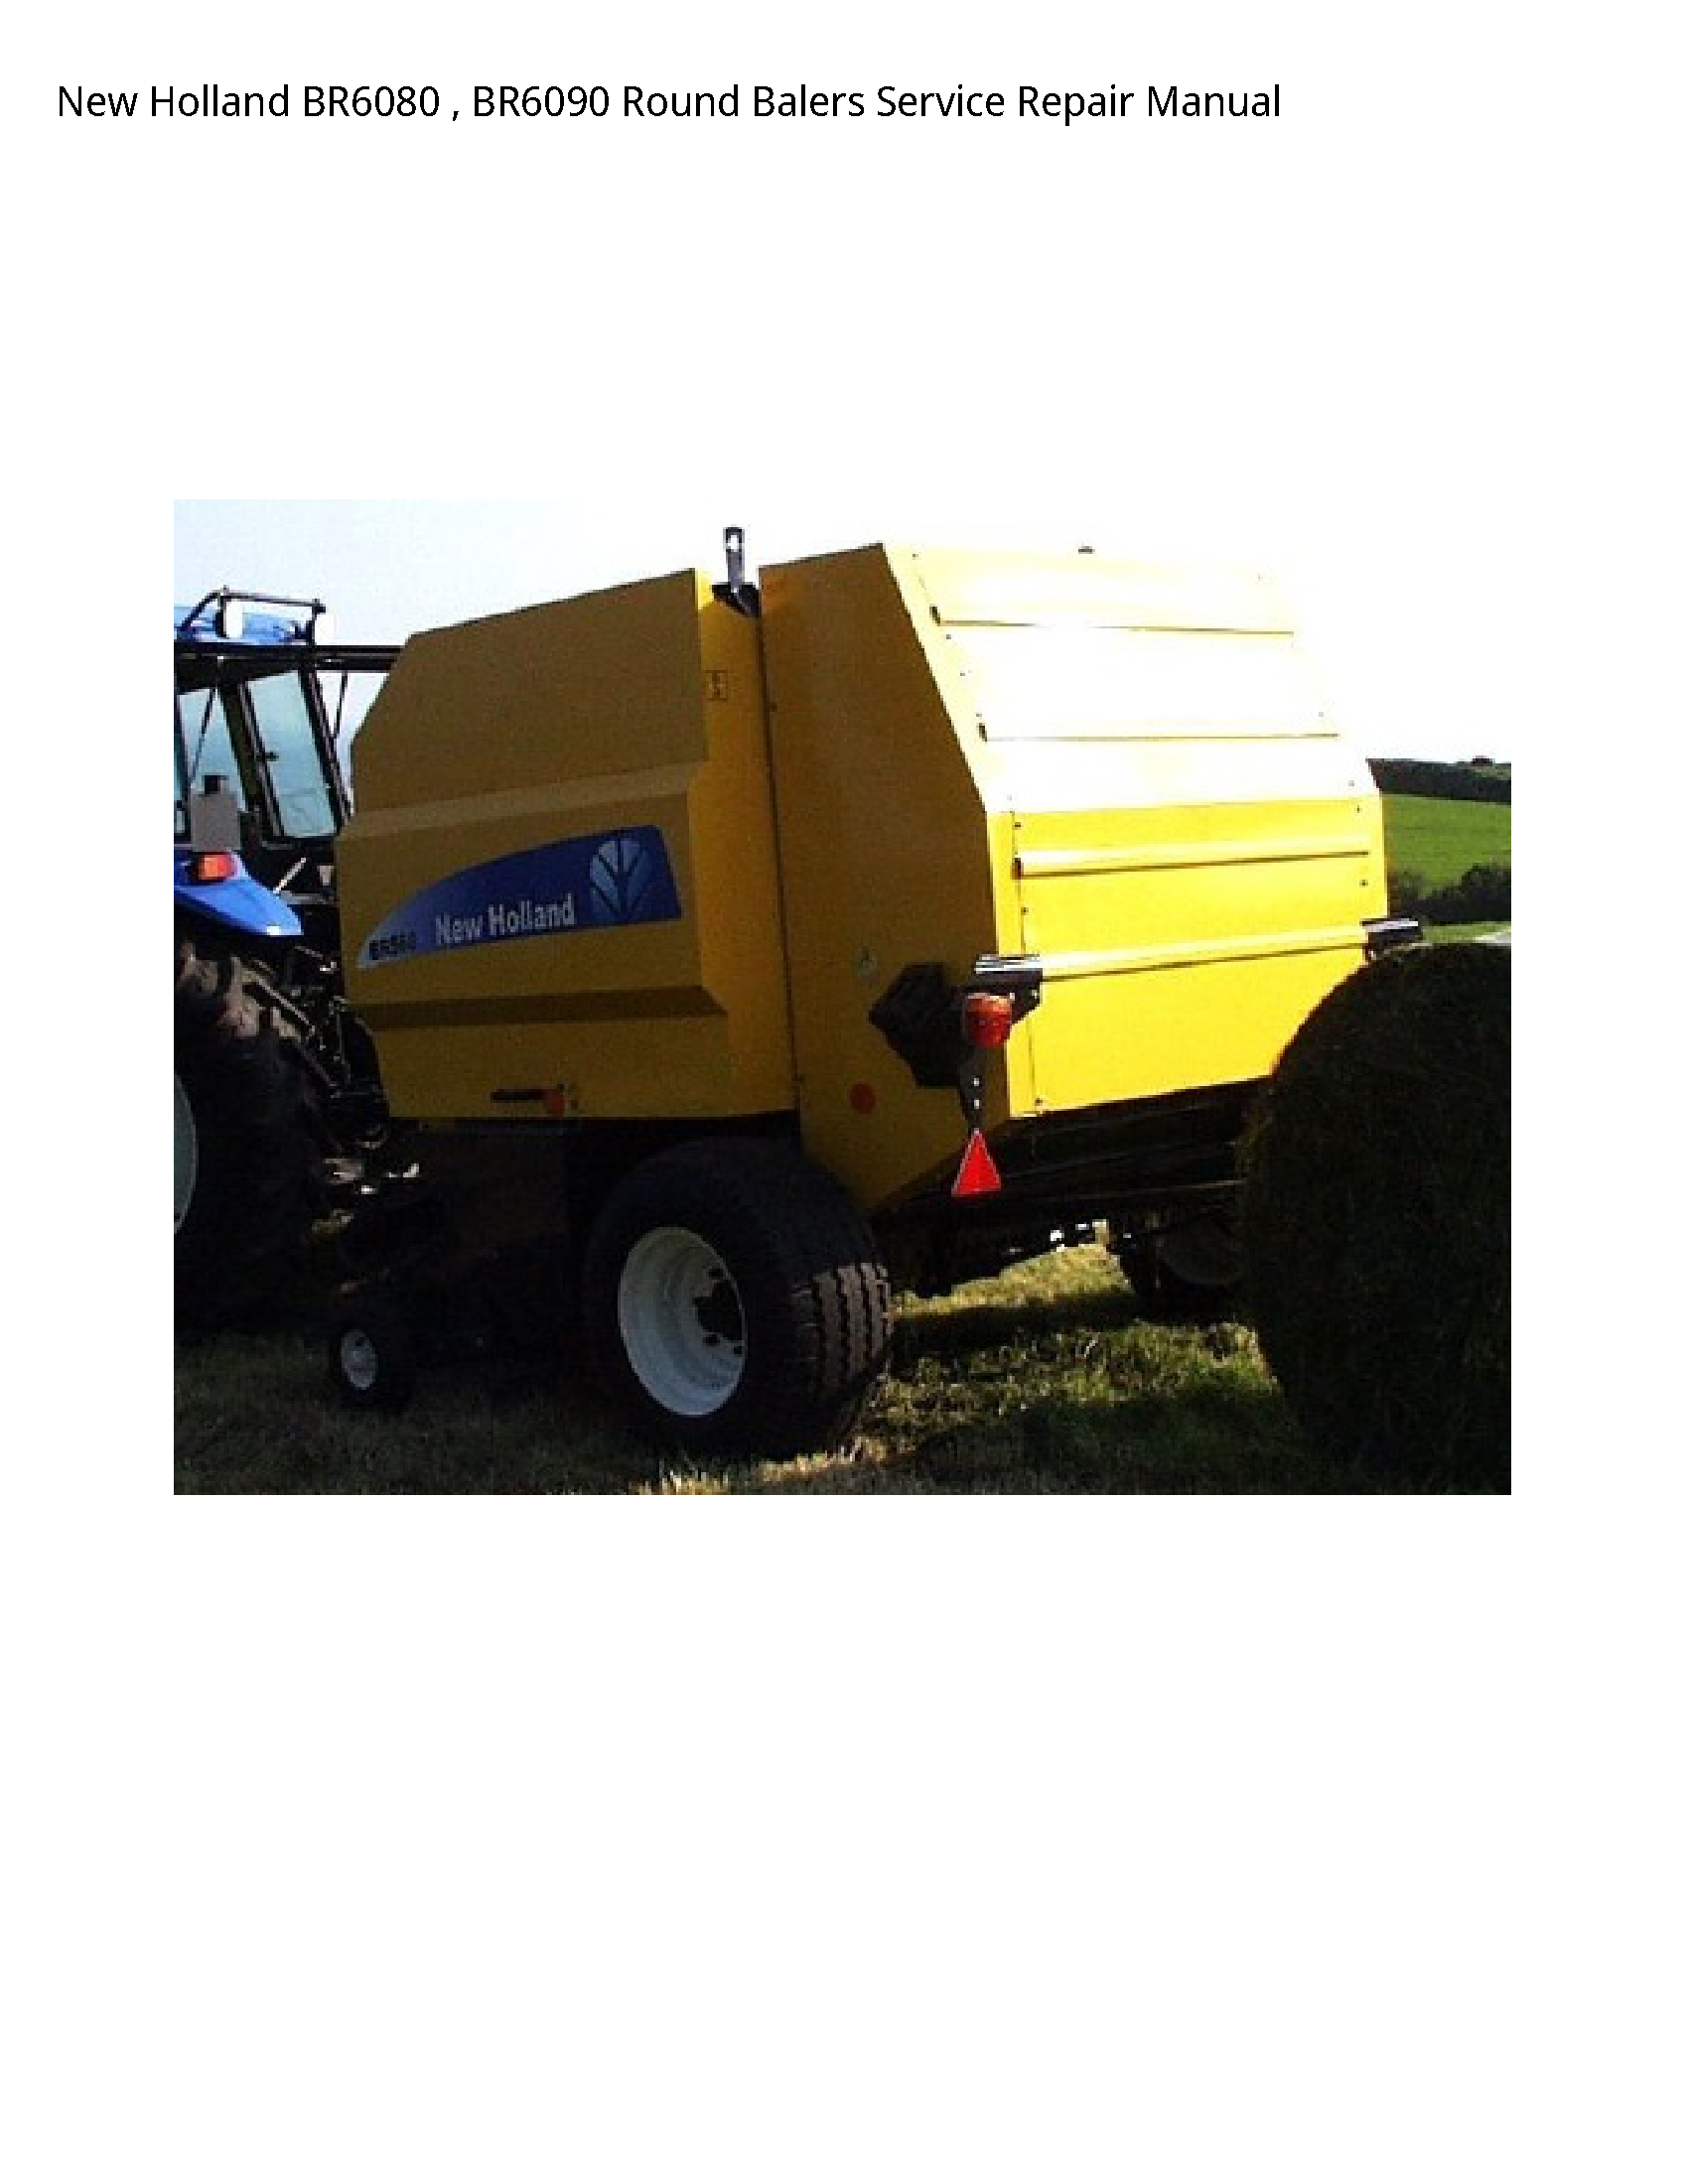 New Holland BR6080 Round Balers manual